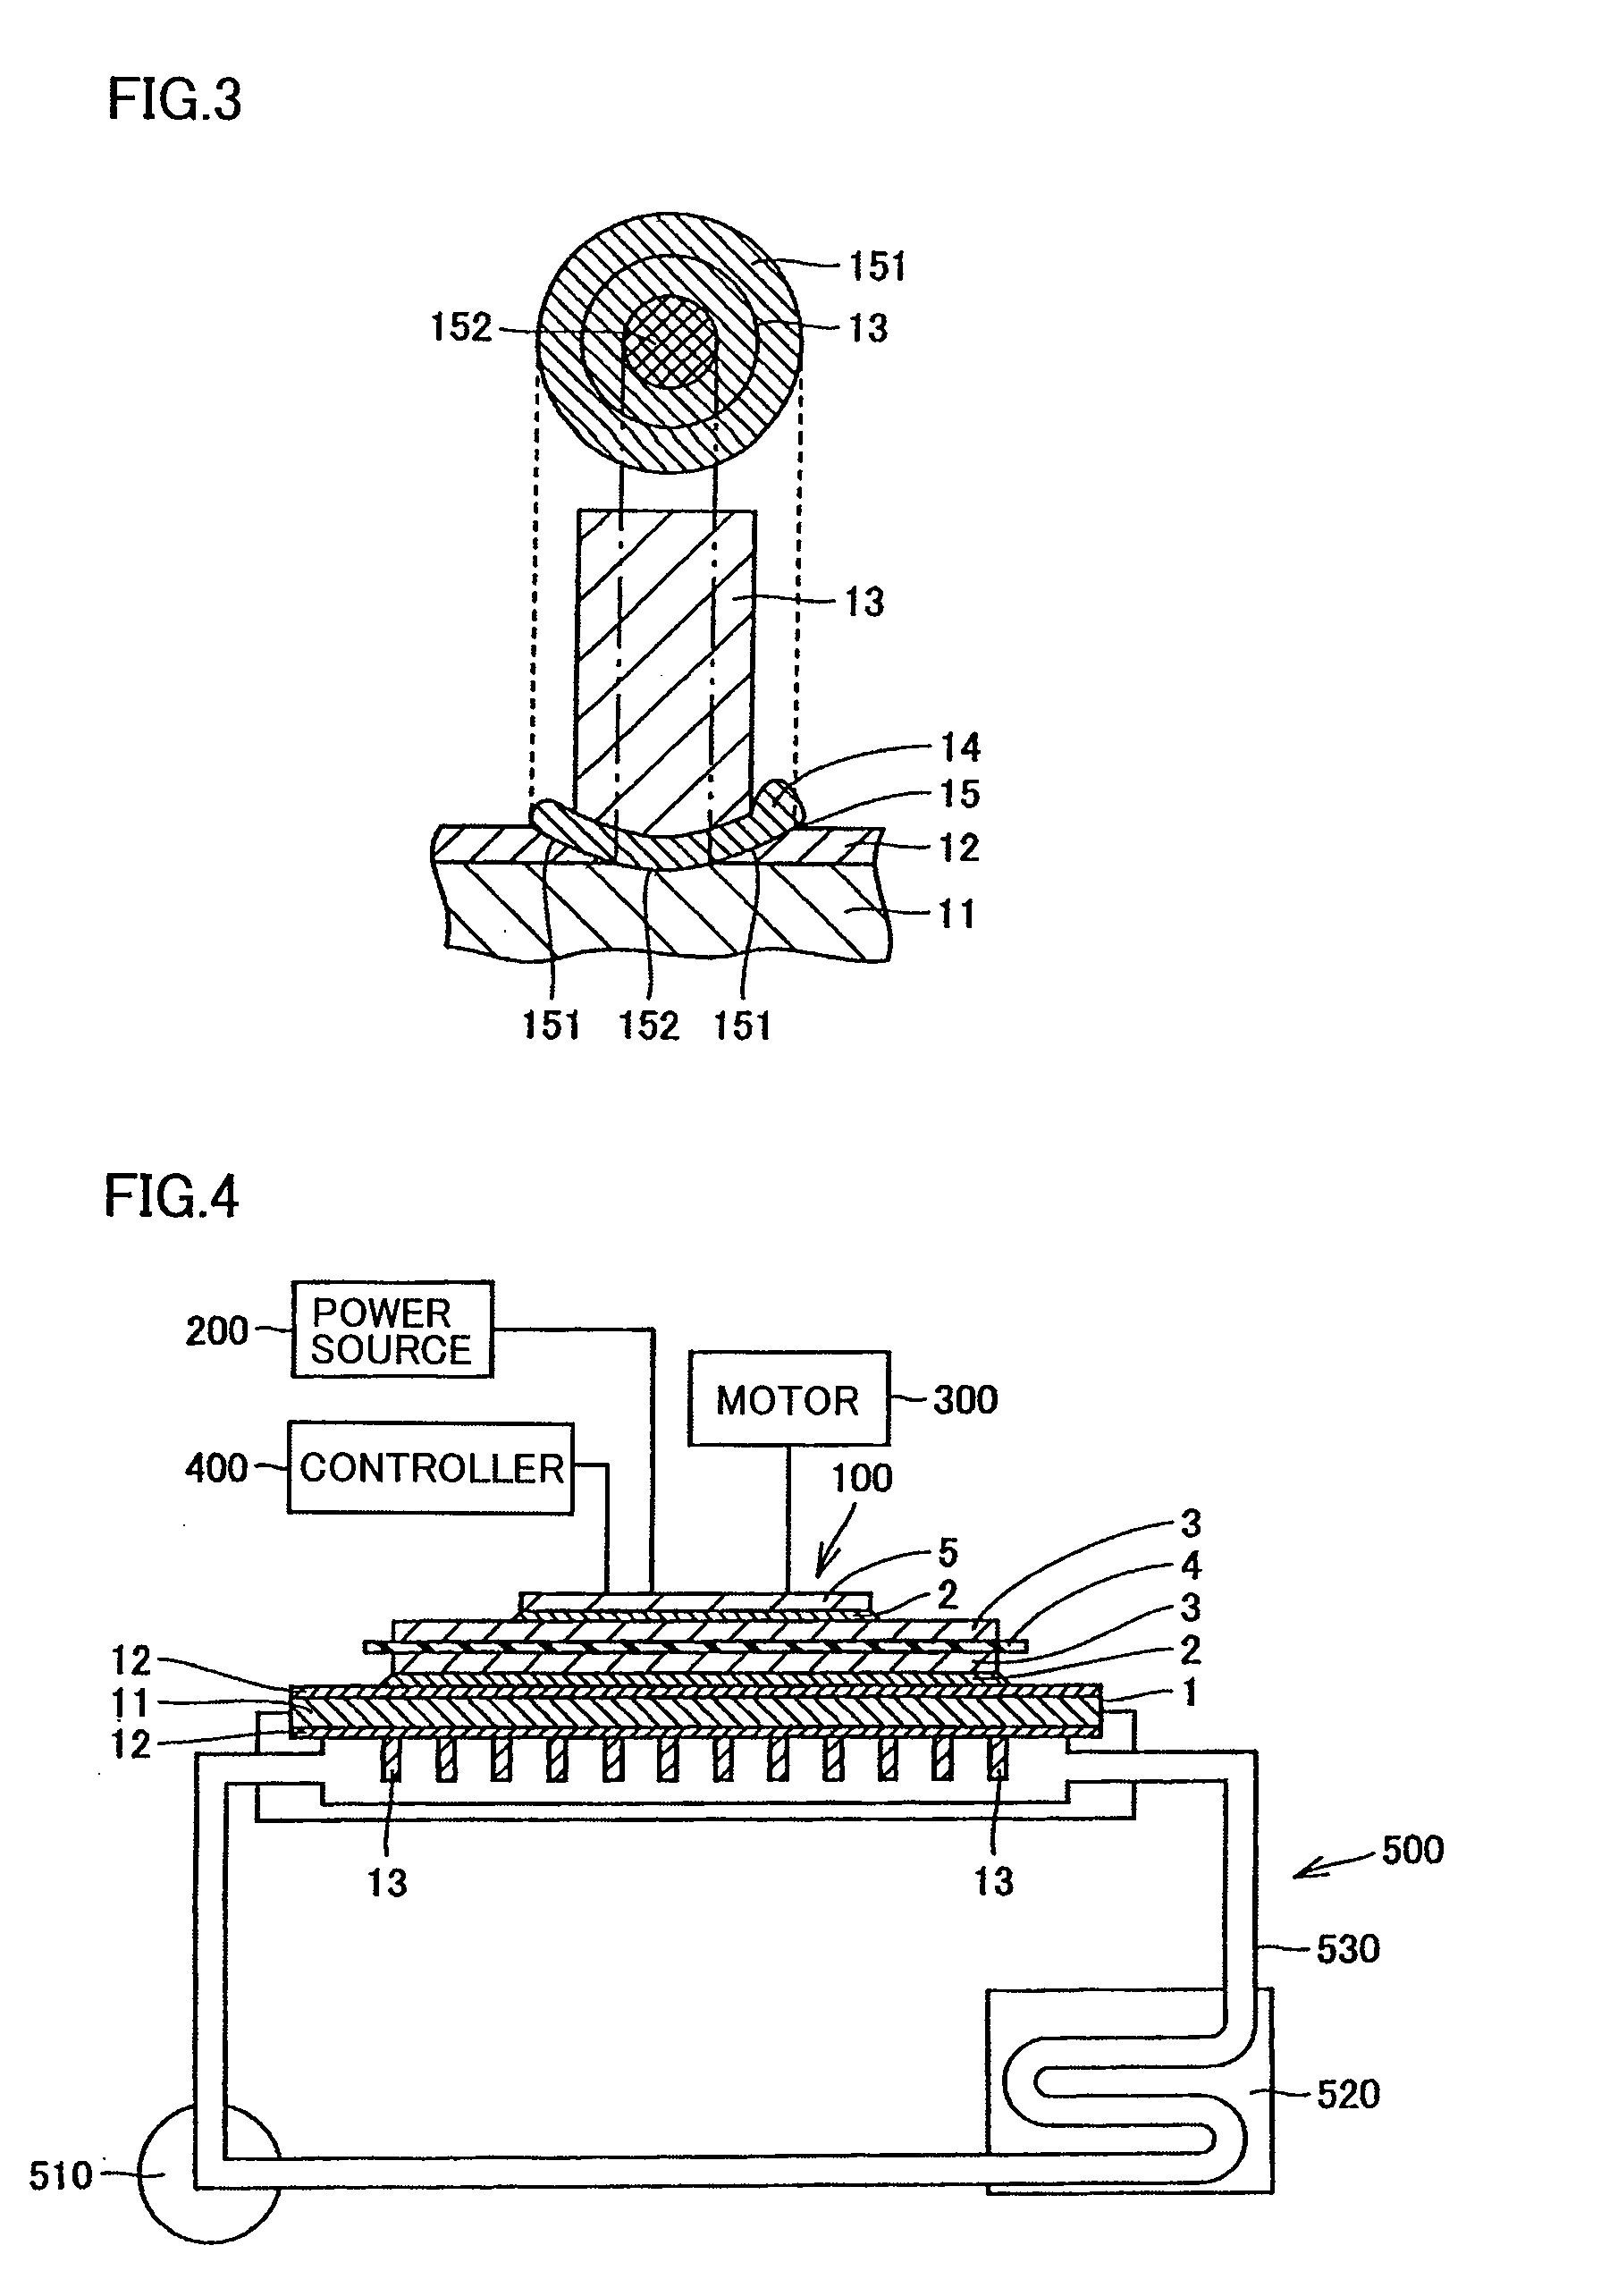 Heat spreader for semiconductor device and method for manufacturing the same